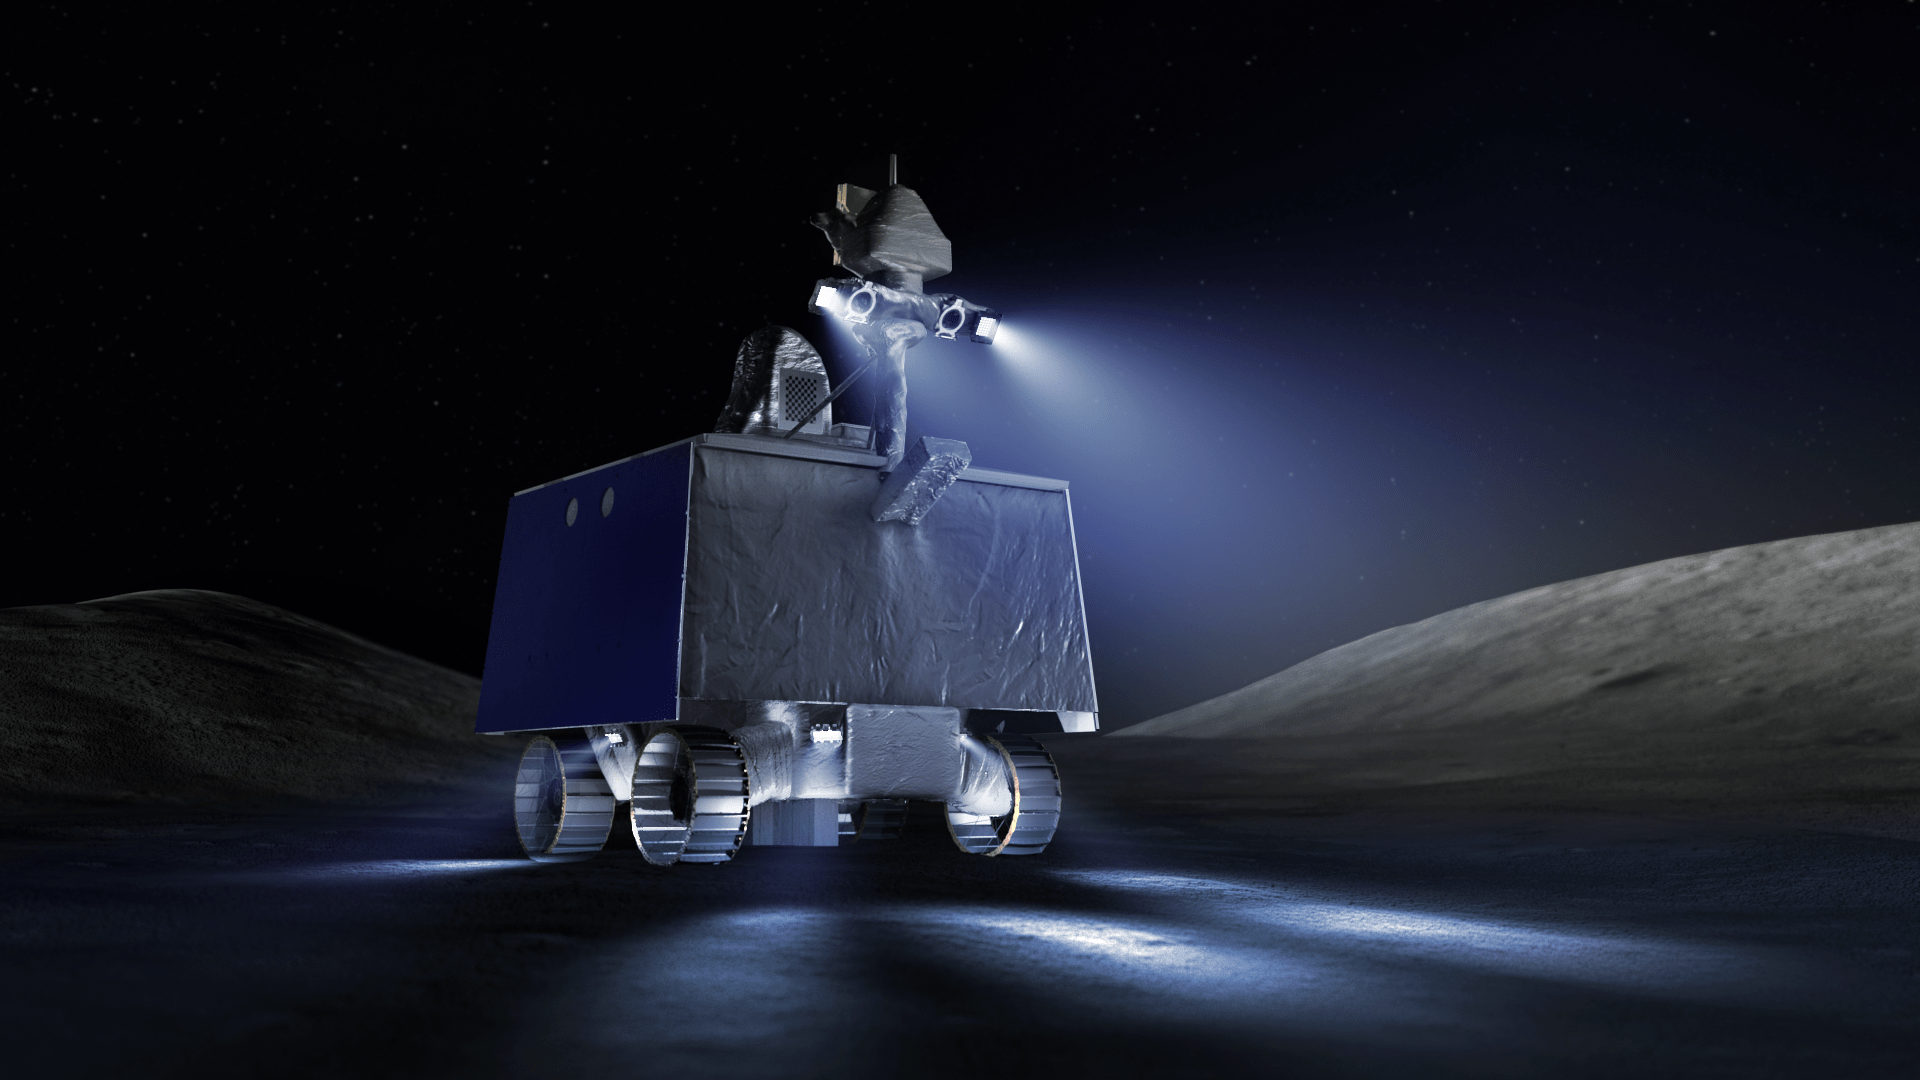 An illustration of NASA’s Volatiles Investigating Polar Exploration Rover, or VIPER, on the Moon, its blue lights illuminating the ground around it.